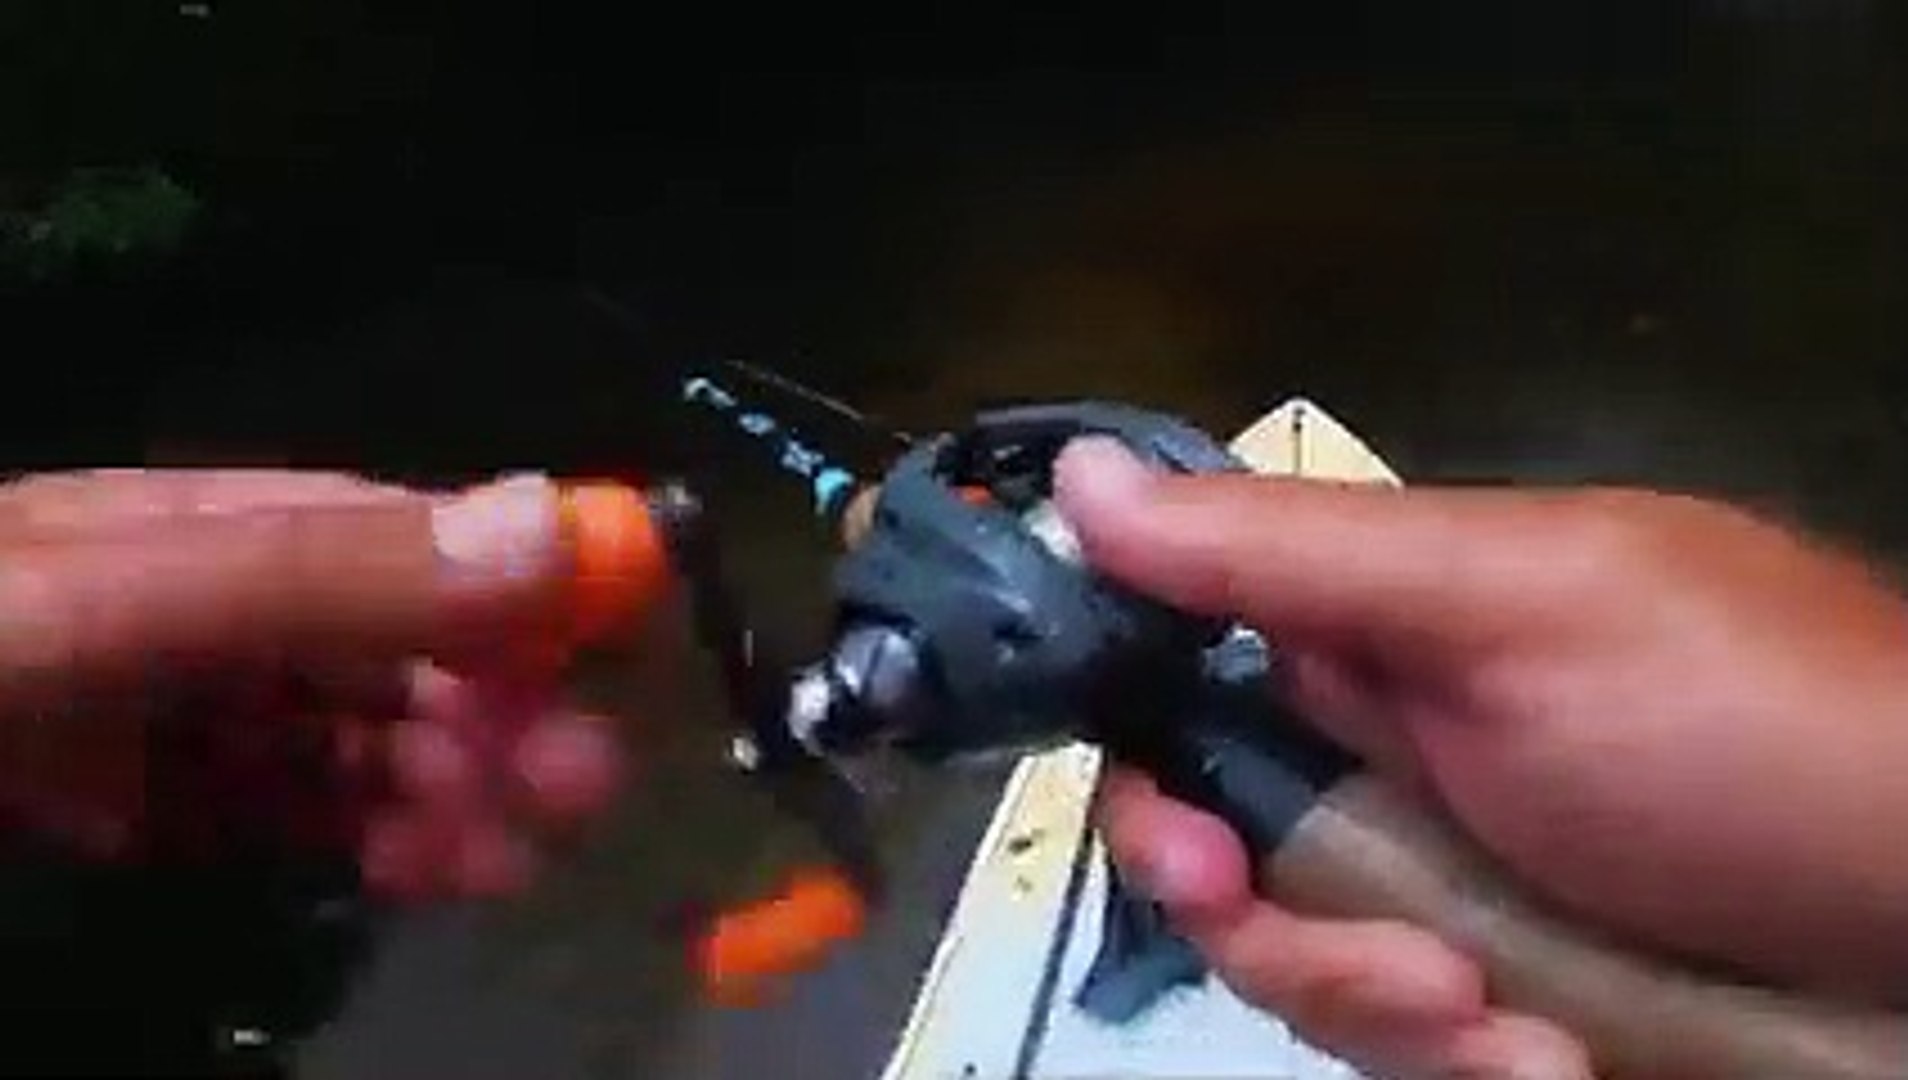 How to ReString A Fishing Pole 